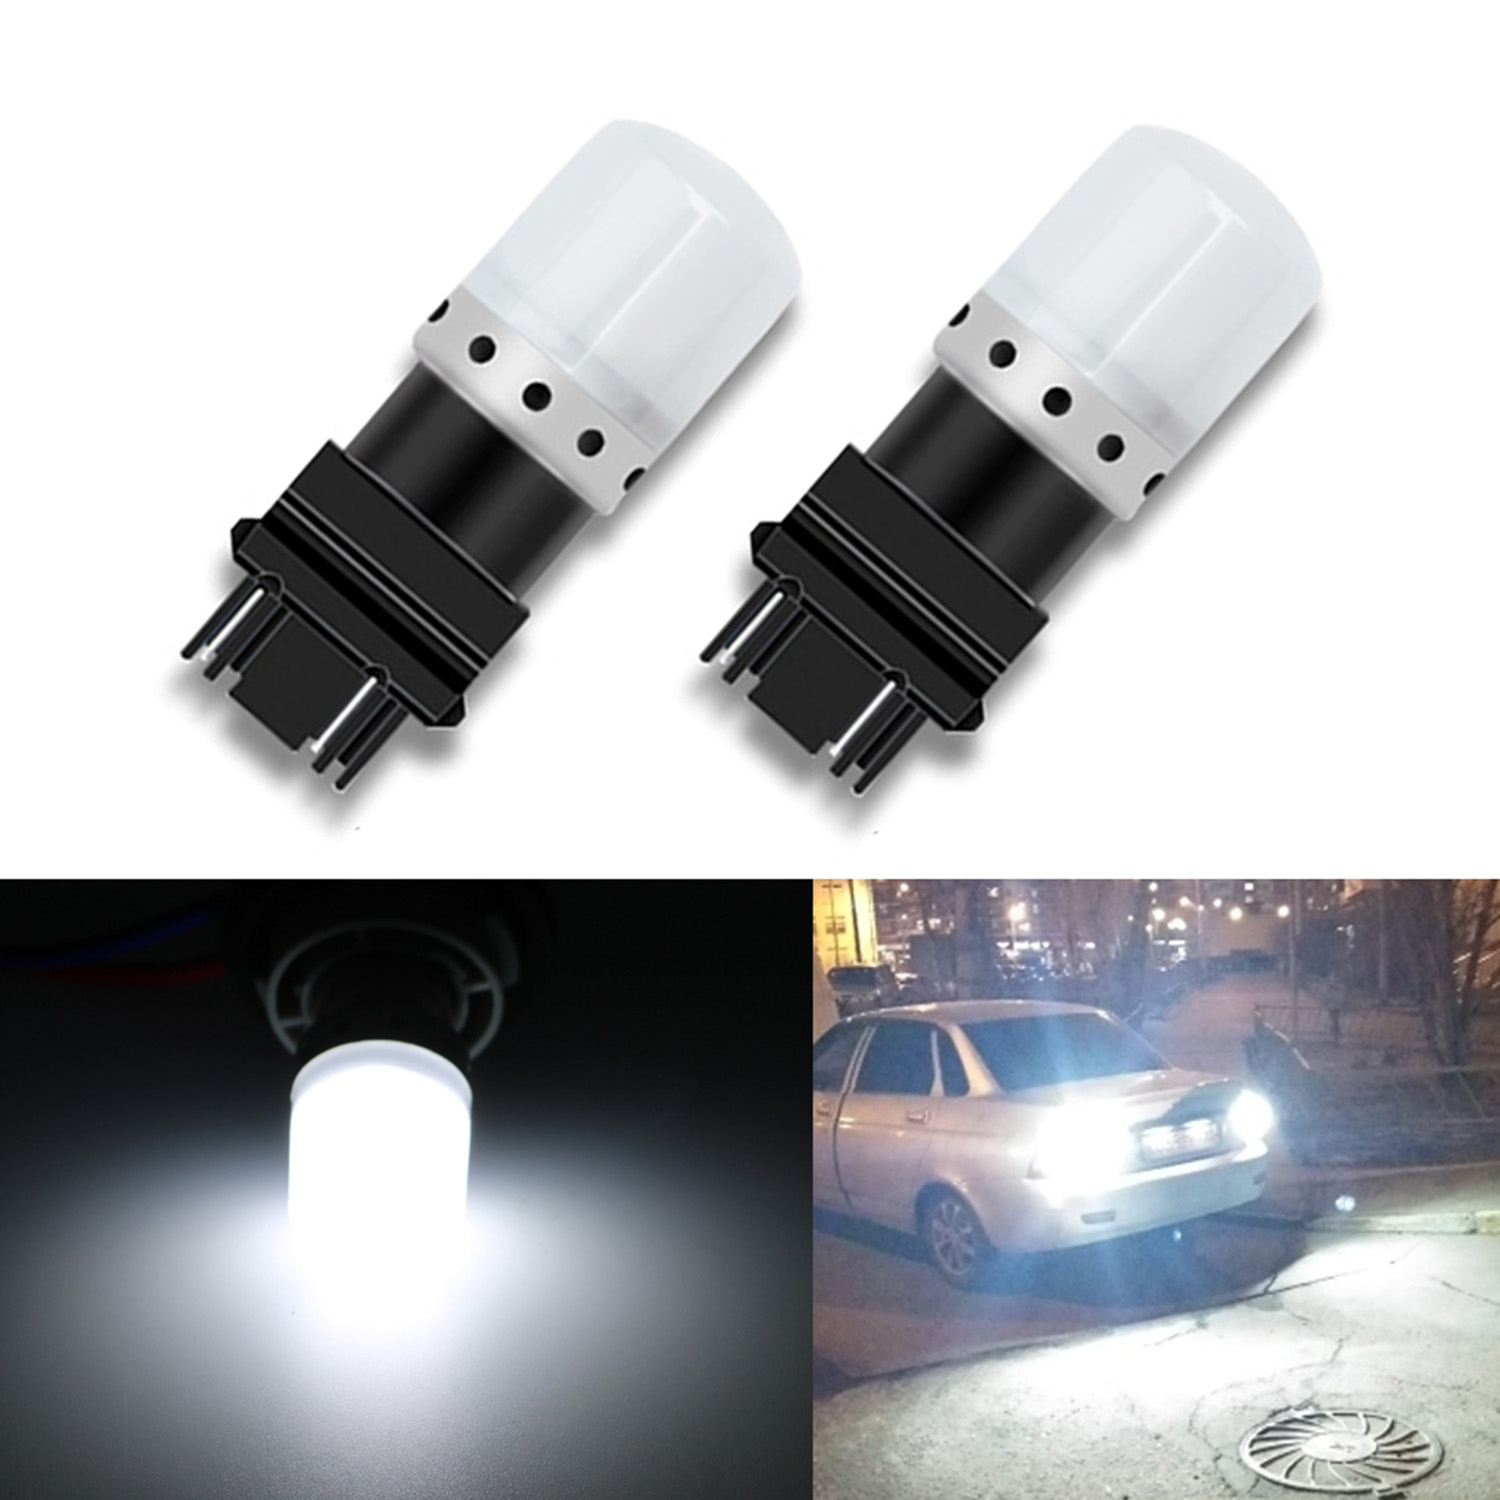 LED Light 5W 921 White 6000K Two Bulbs Back Up Reverse Replace Plug Play Lamp